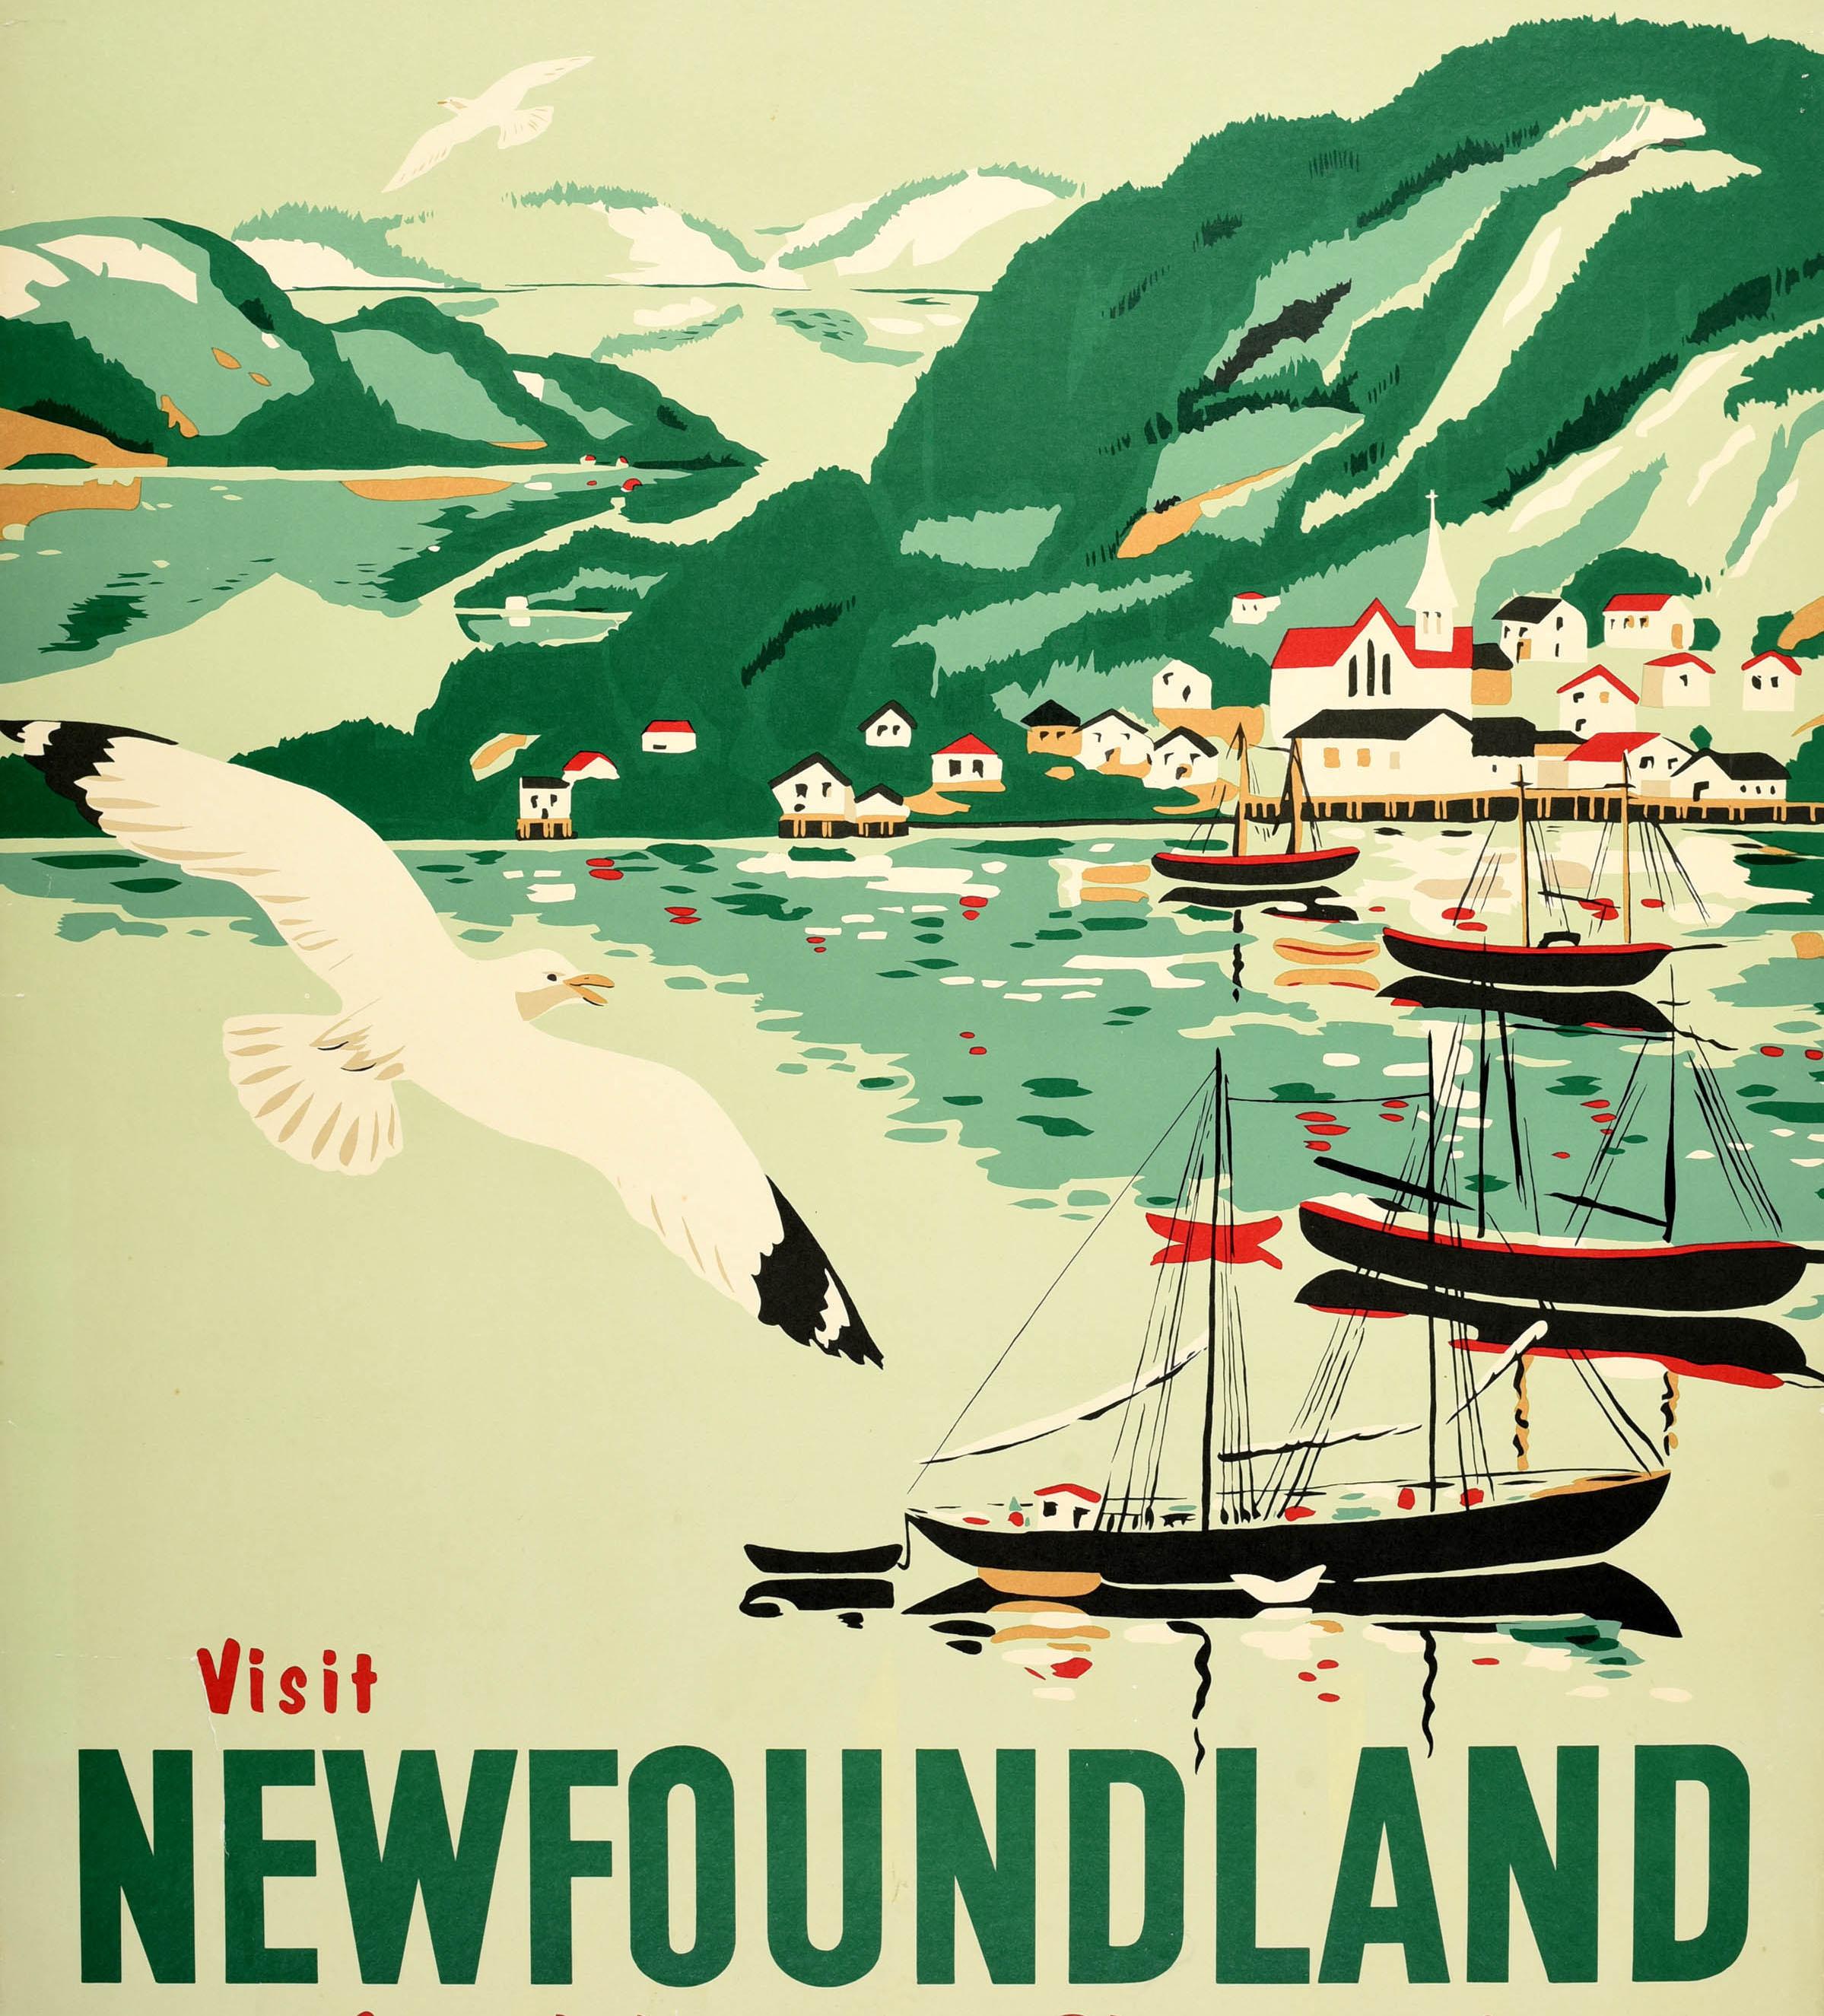 Original vintage travel poster - Visit Newfoundland Canada's Newest Playground - featuring a colourful view of sailing boats anchored in a harbour with seagulls flying overhead, a town and trees on the hills reflected on the water in the distance,